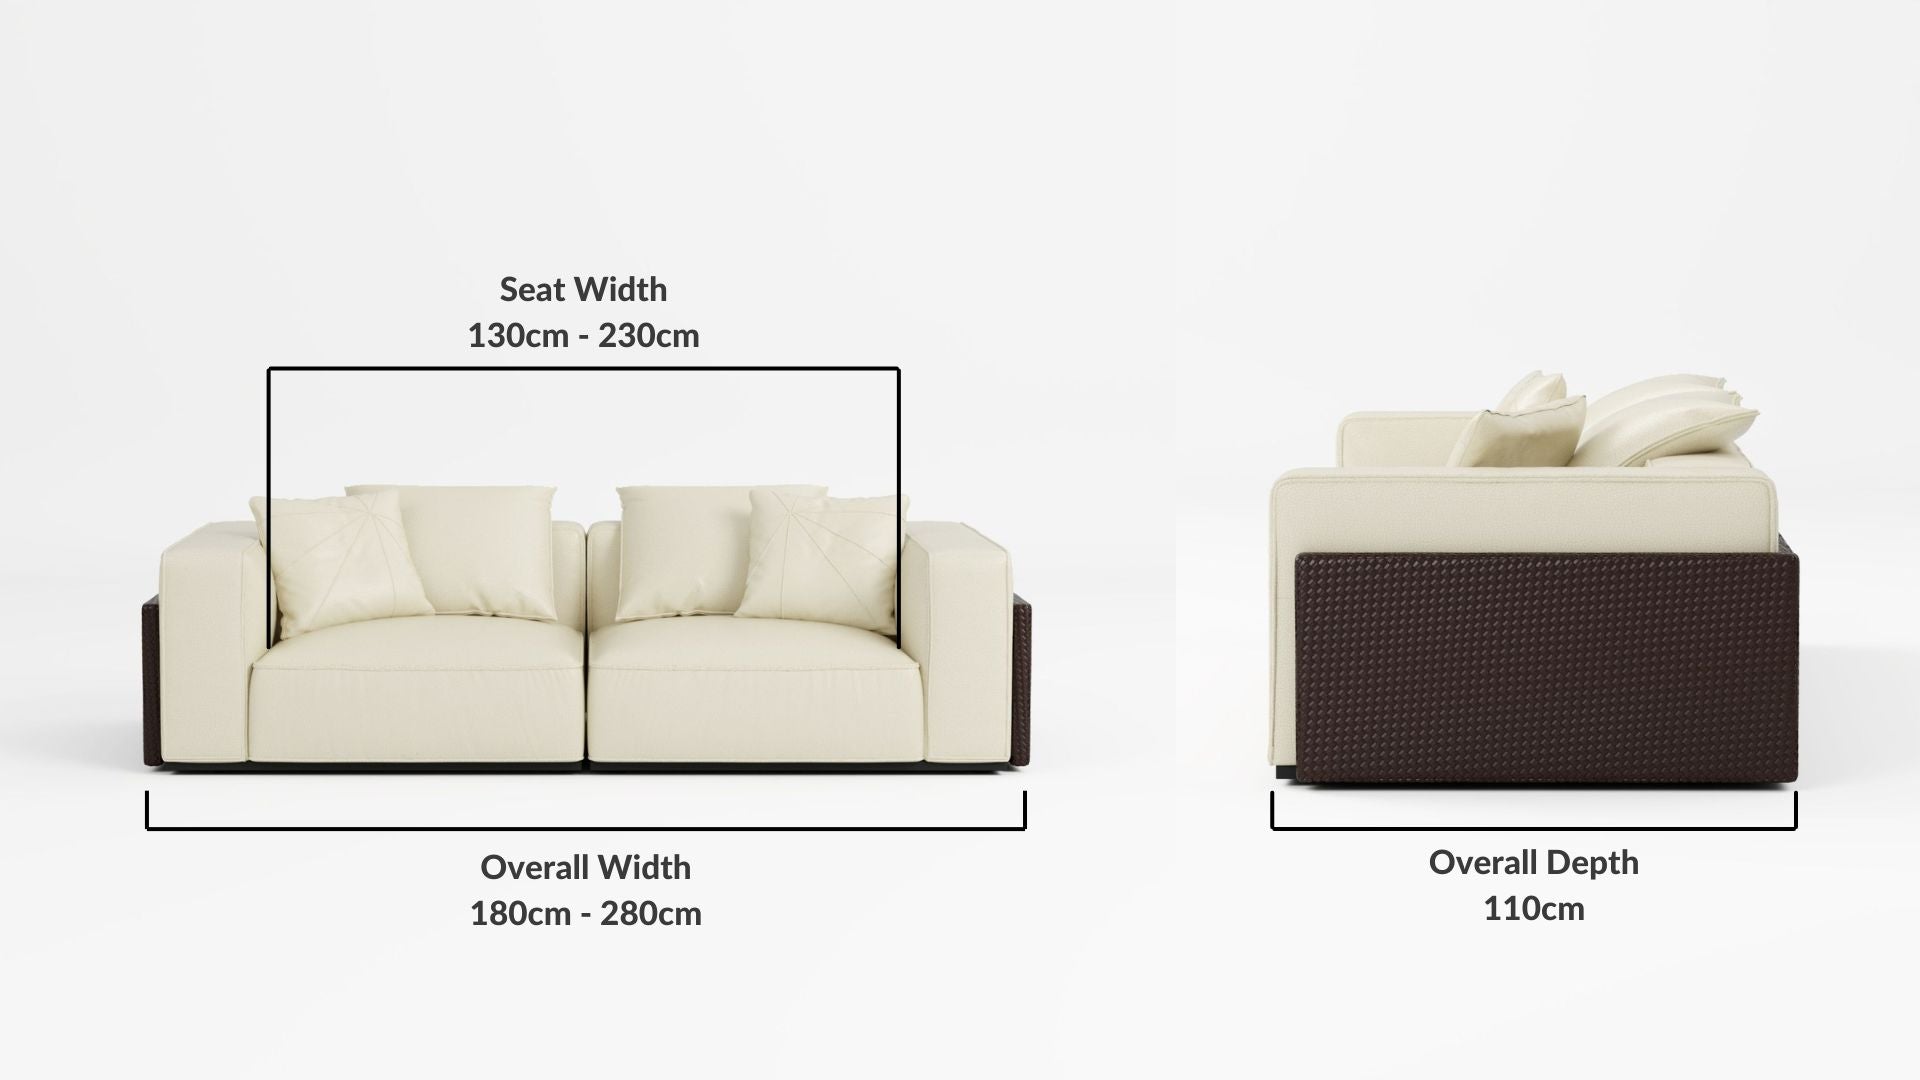 Details the key dimensions in terms of overall width, overall depth and seat width for Carson Full Leather Sofa